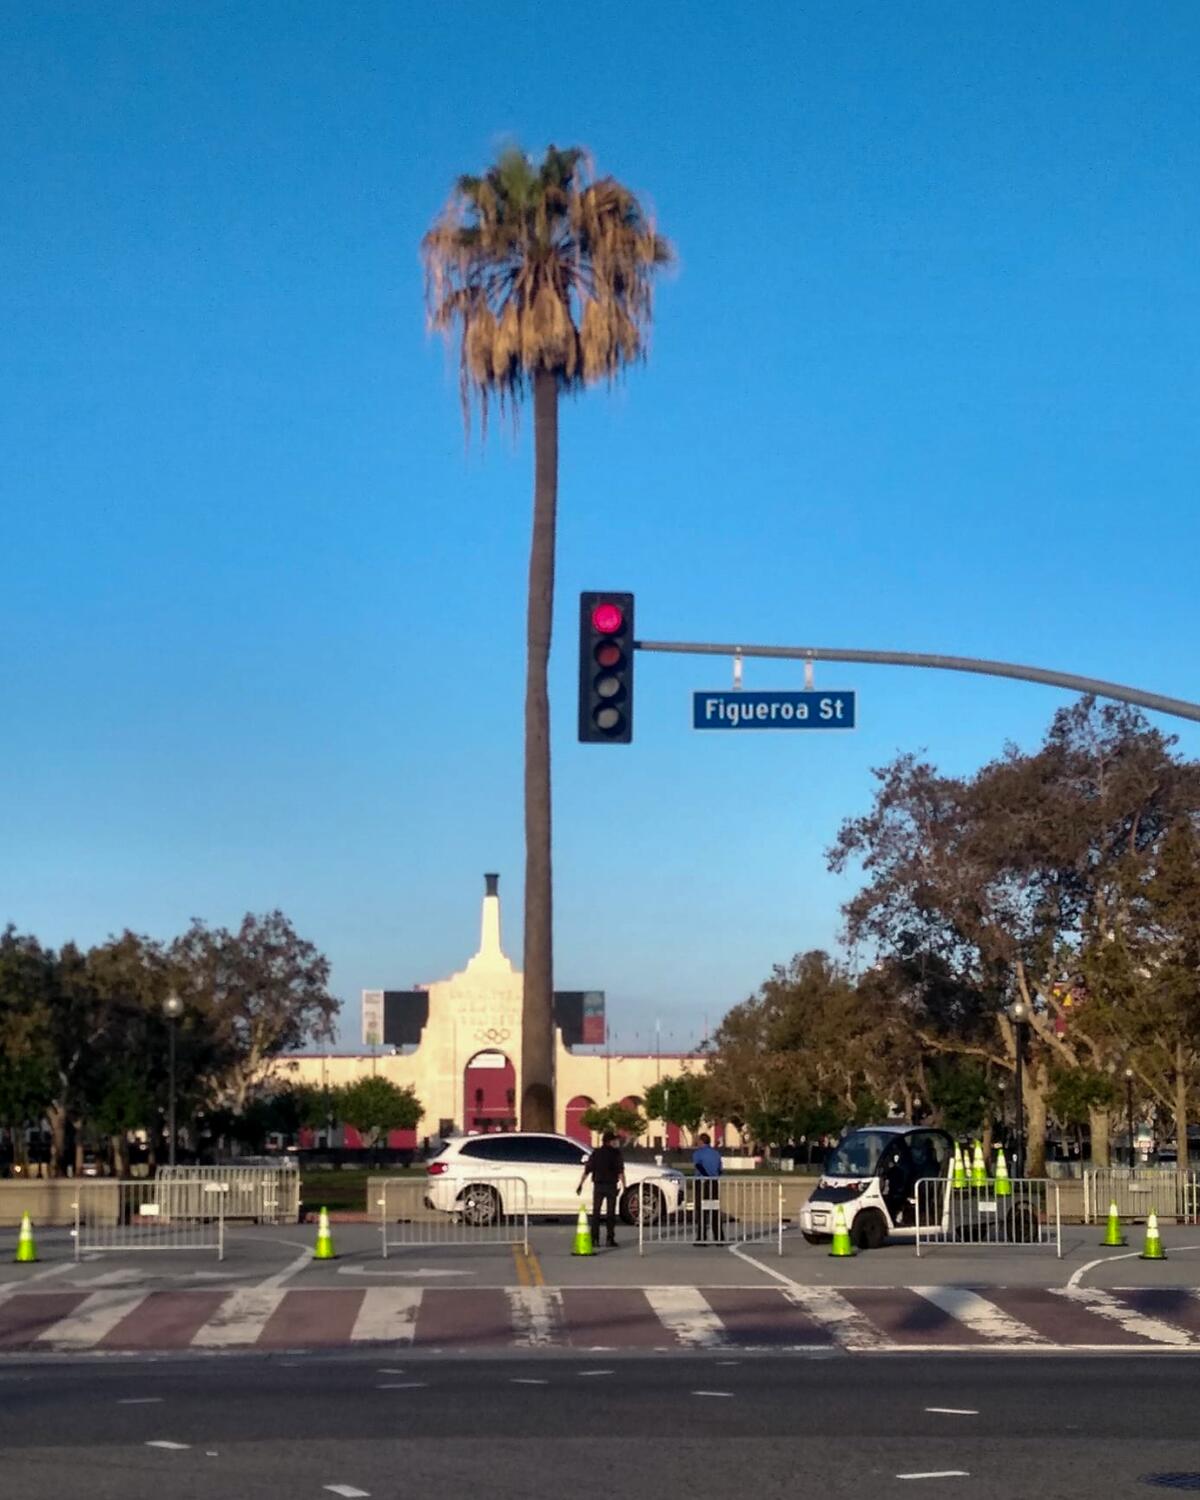 A photo of a palm tree next to a traffic light with a "Figueroa St." sign, the Coliseum entrance behind it